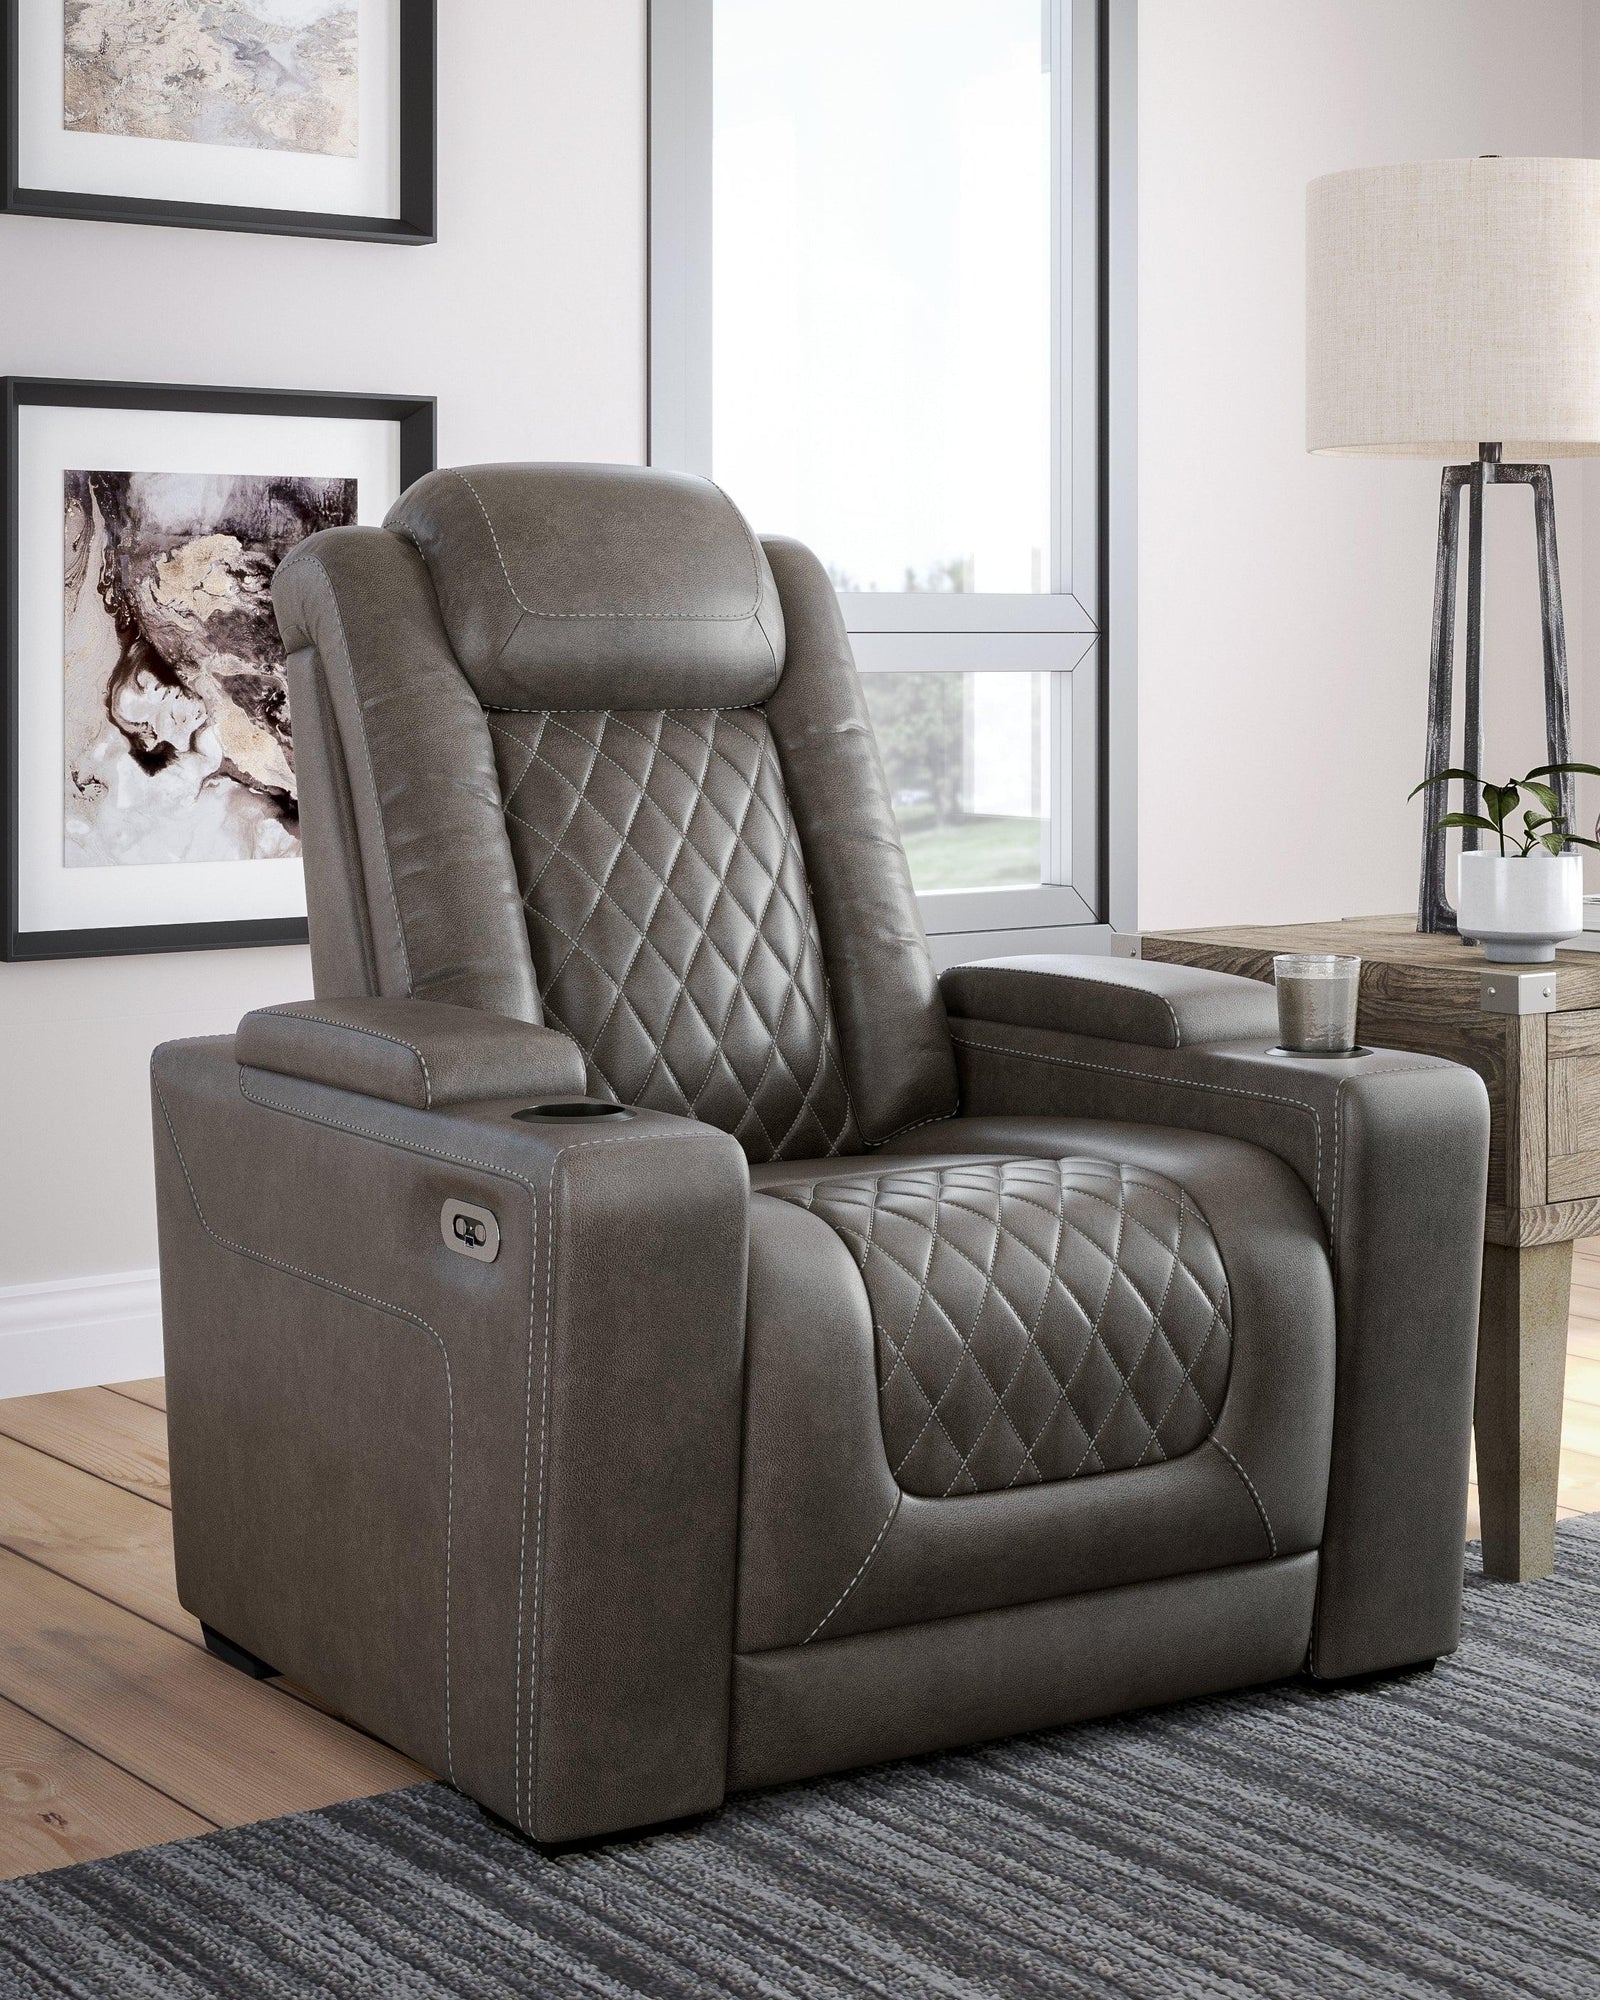 Hyllmont Gray Faux Leather Recliner